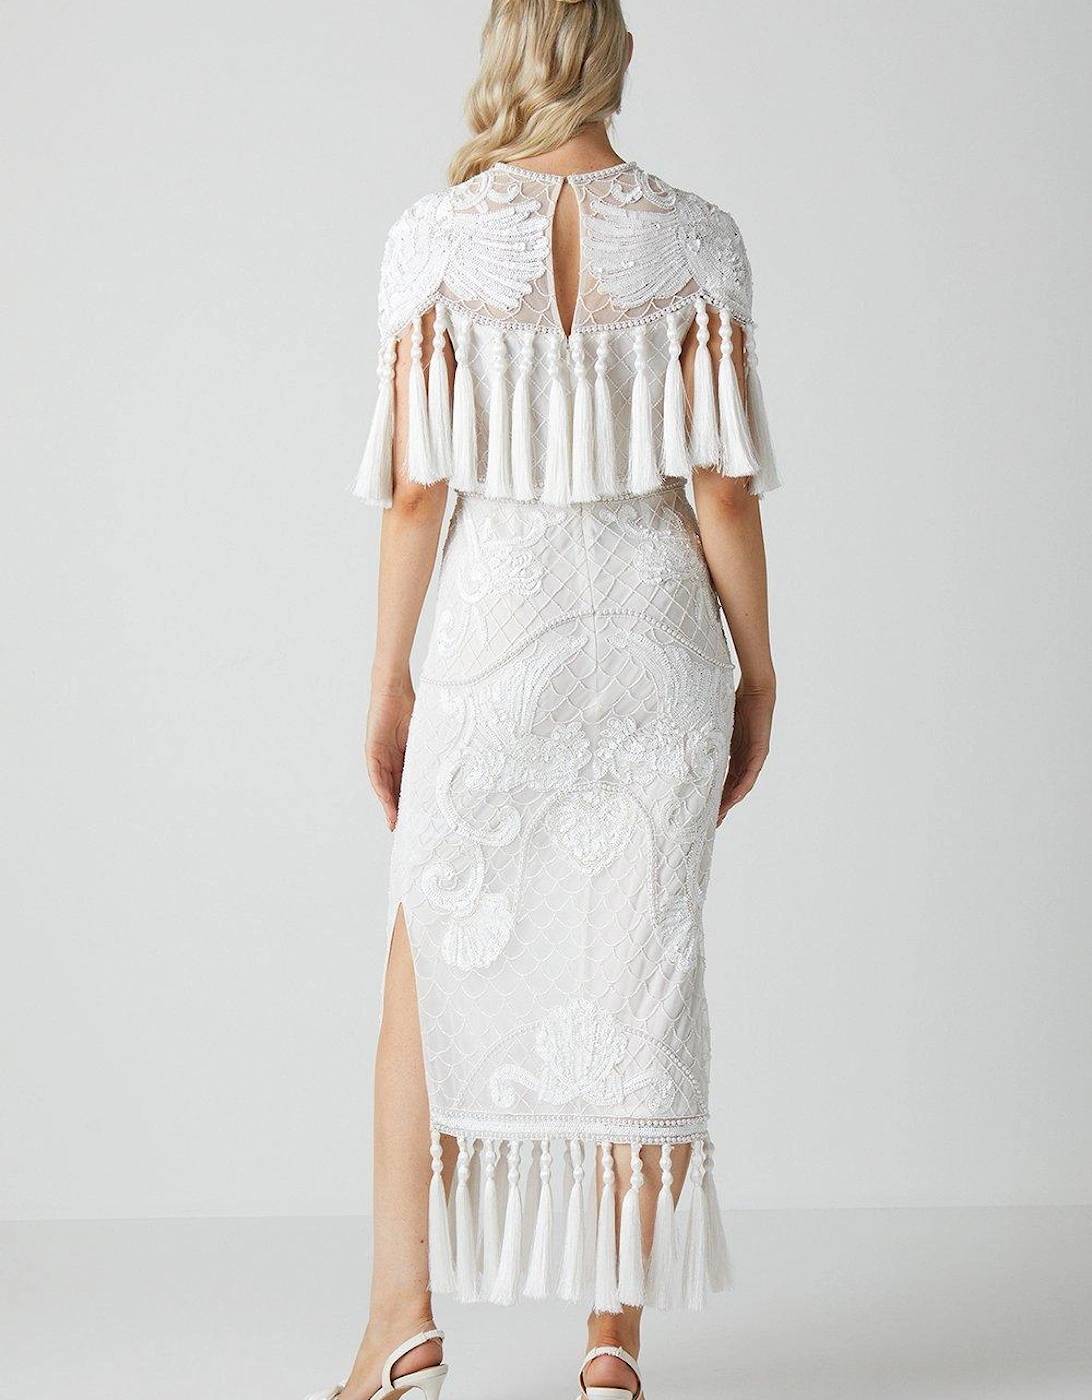 All Over Hand Embellished Midi Wedding Dress With Tassels